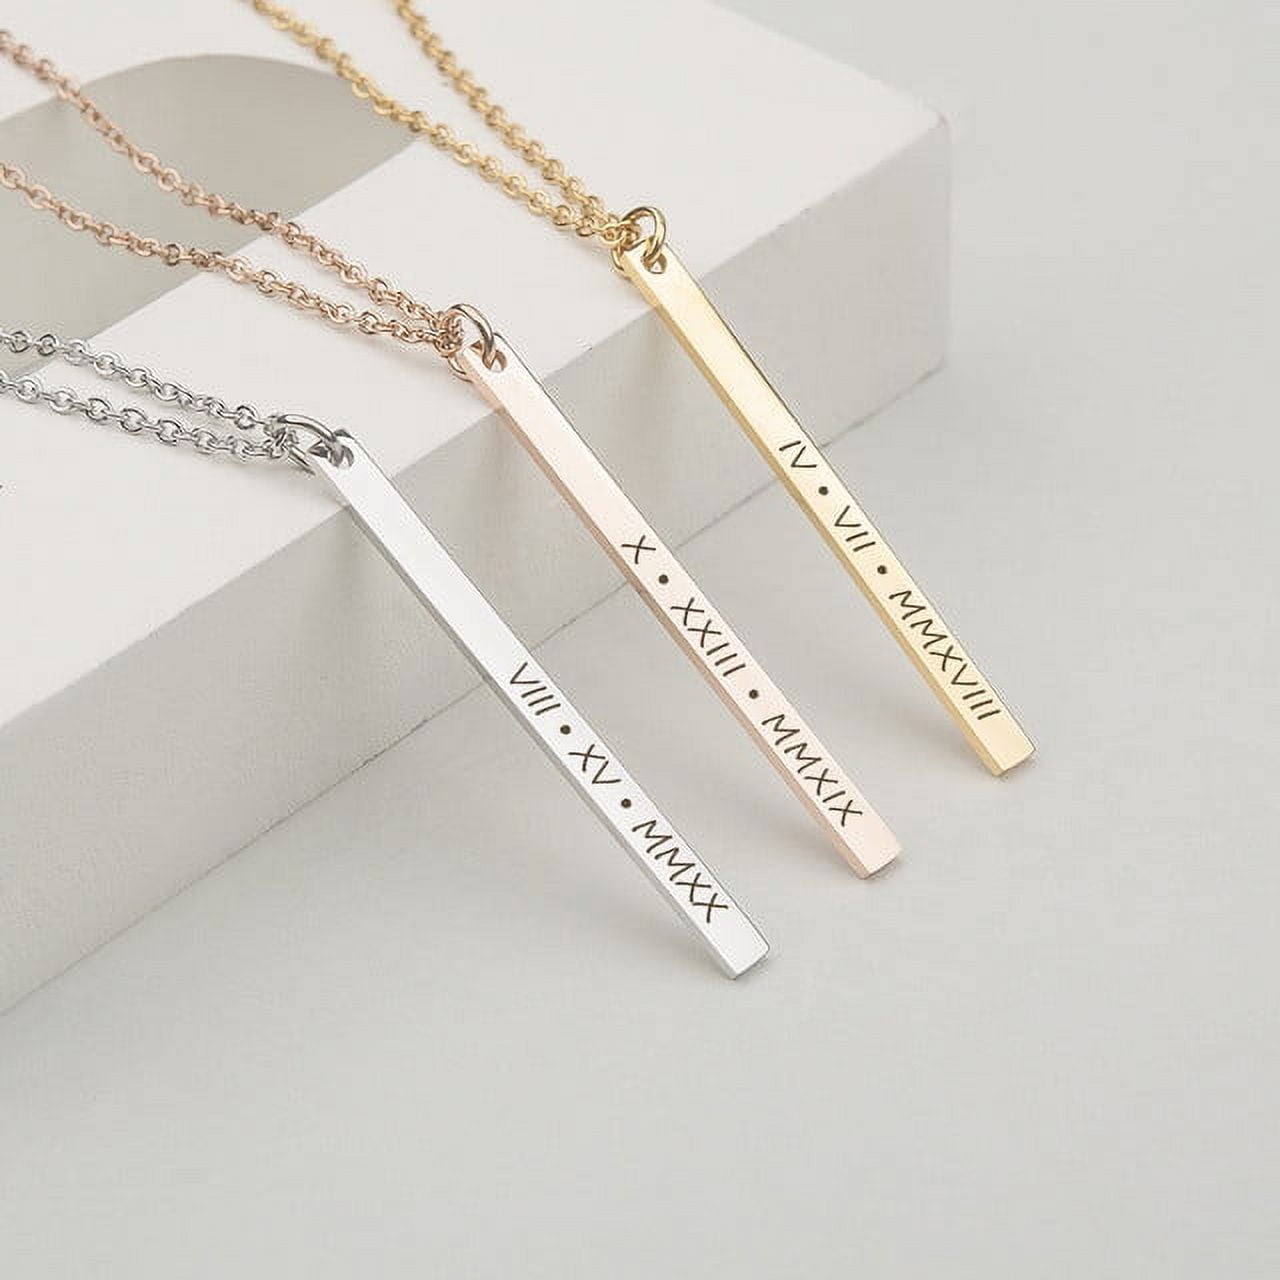 Personalized 4 Sided Name Bar Necklace | Lovable Keepsake Gifts